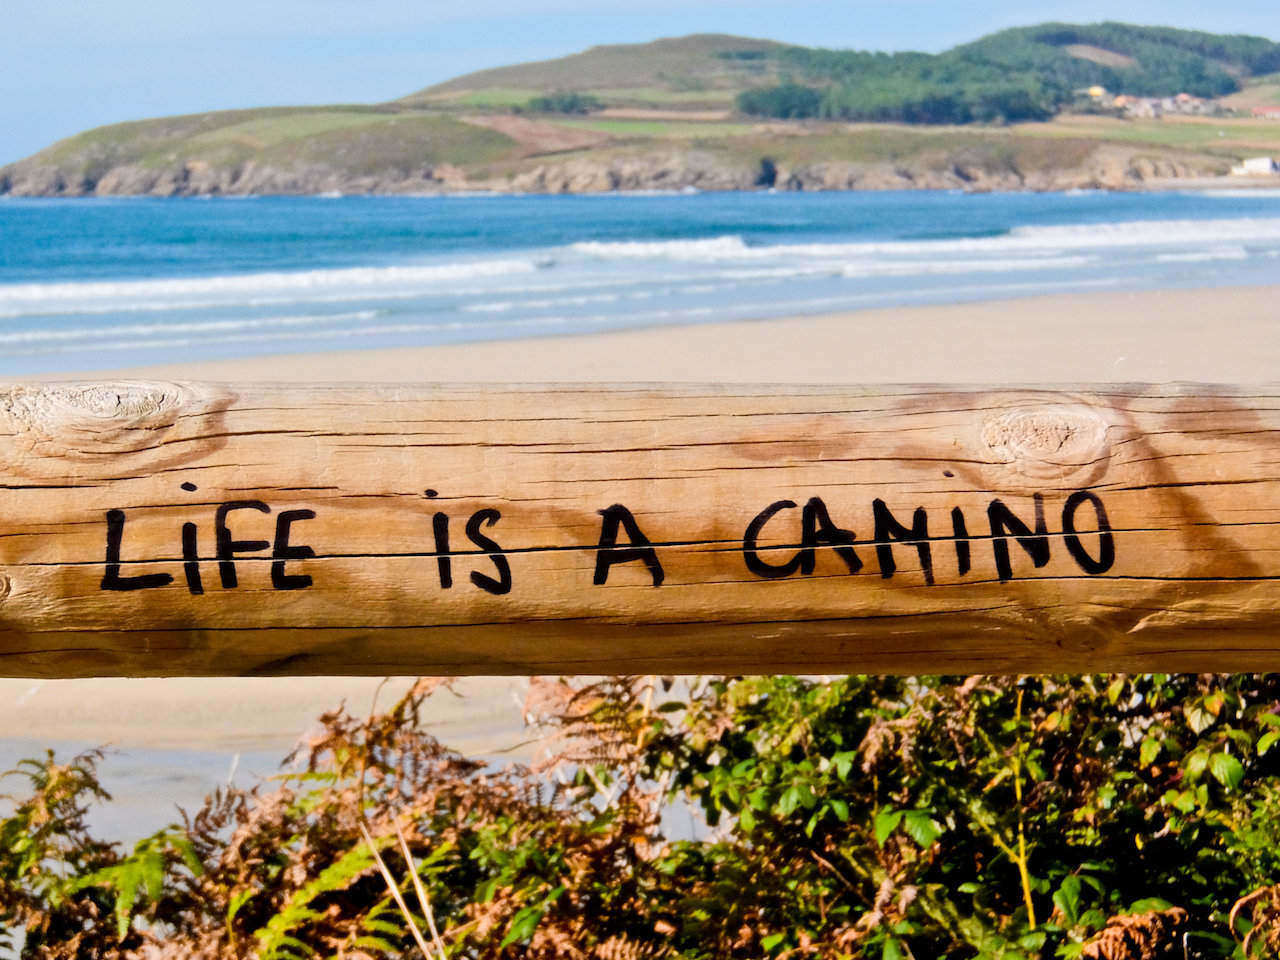 Life is a camino